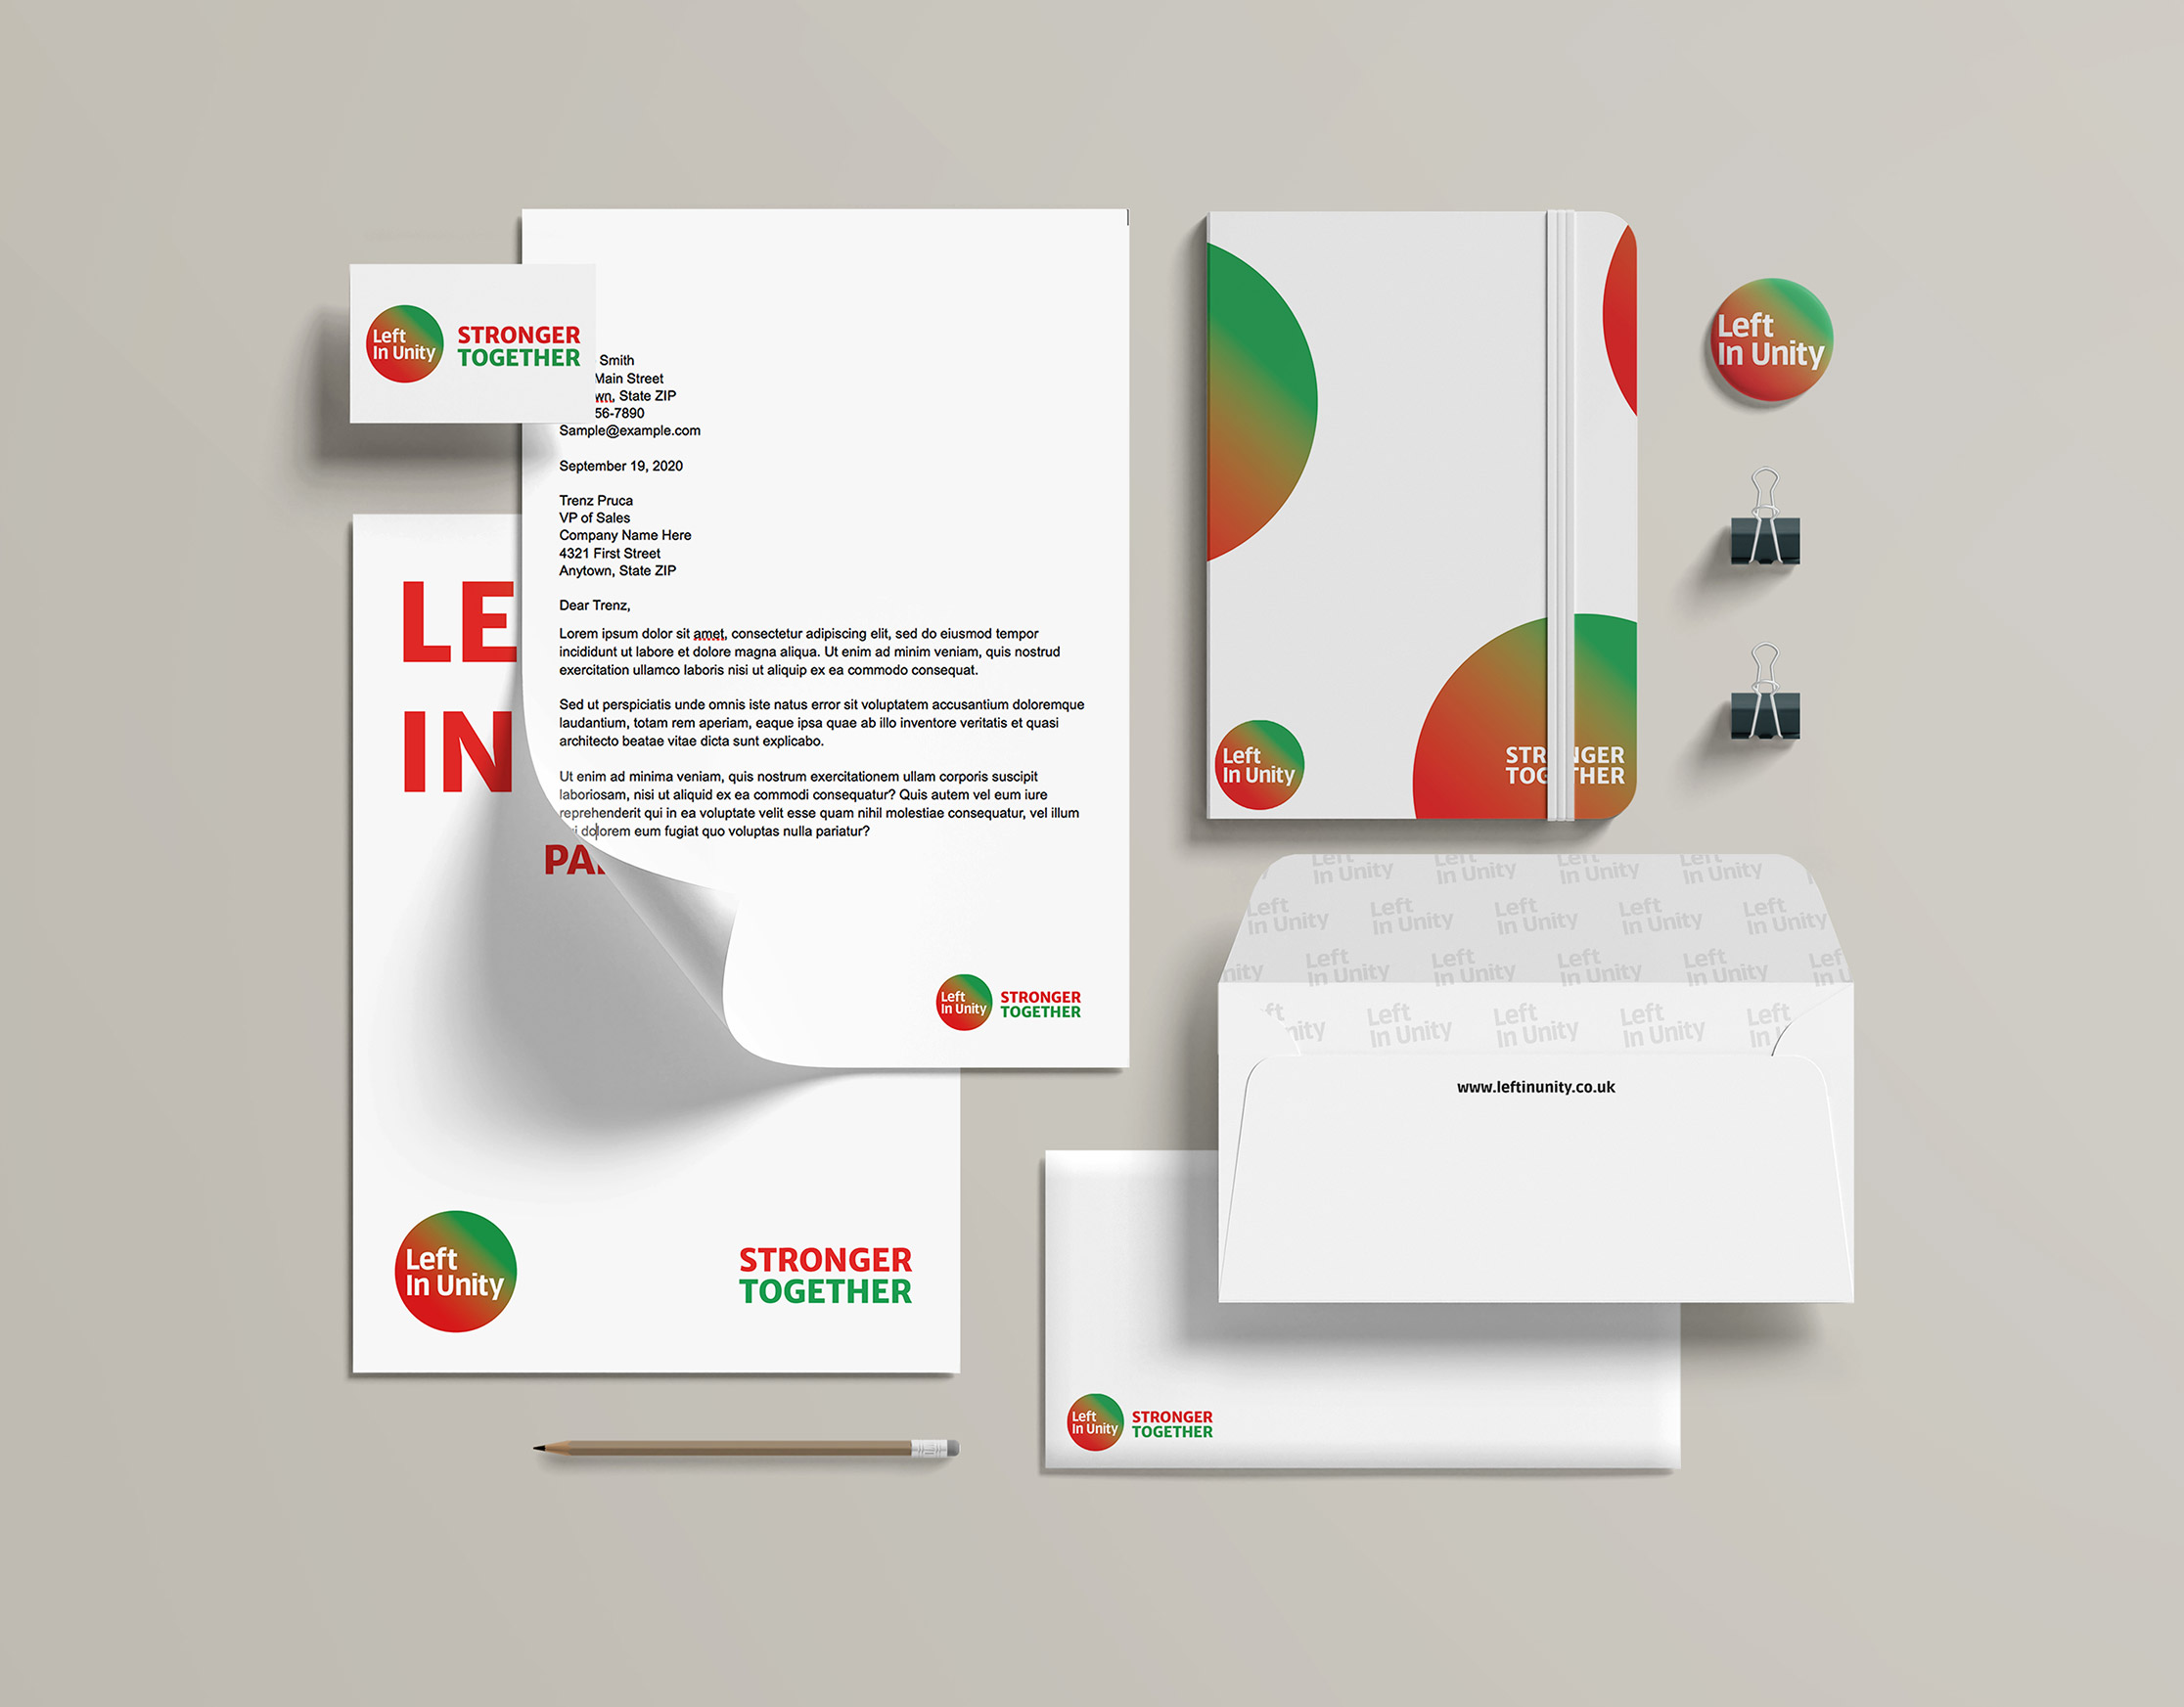 Mock-up visual identity applied to a variety of stationary items